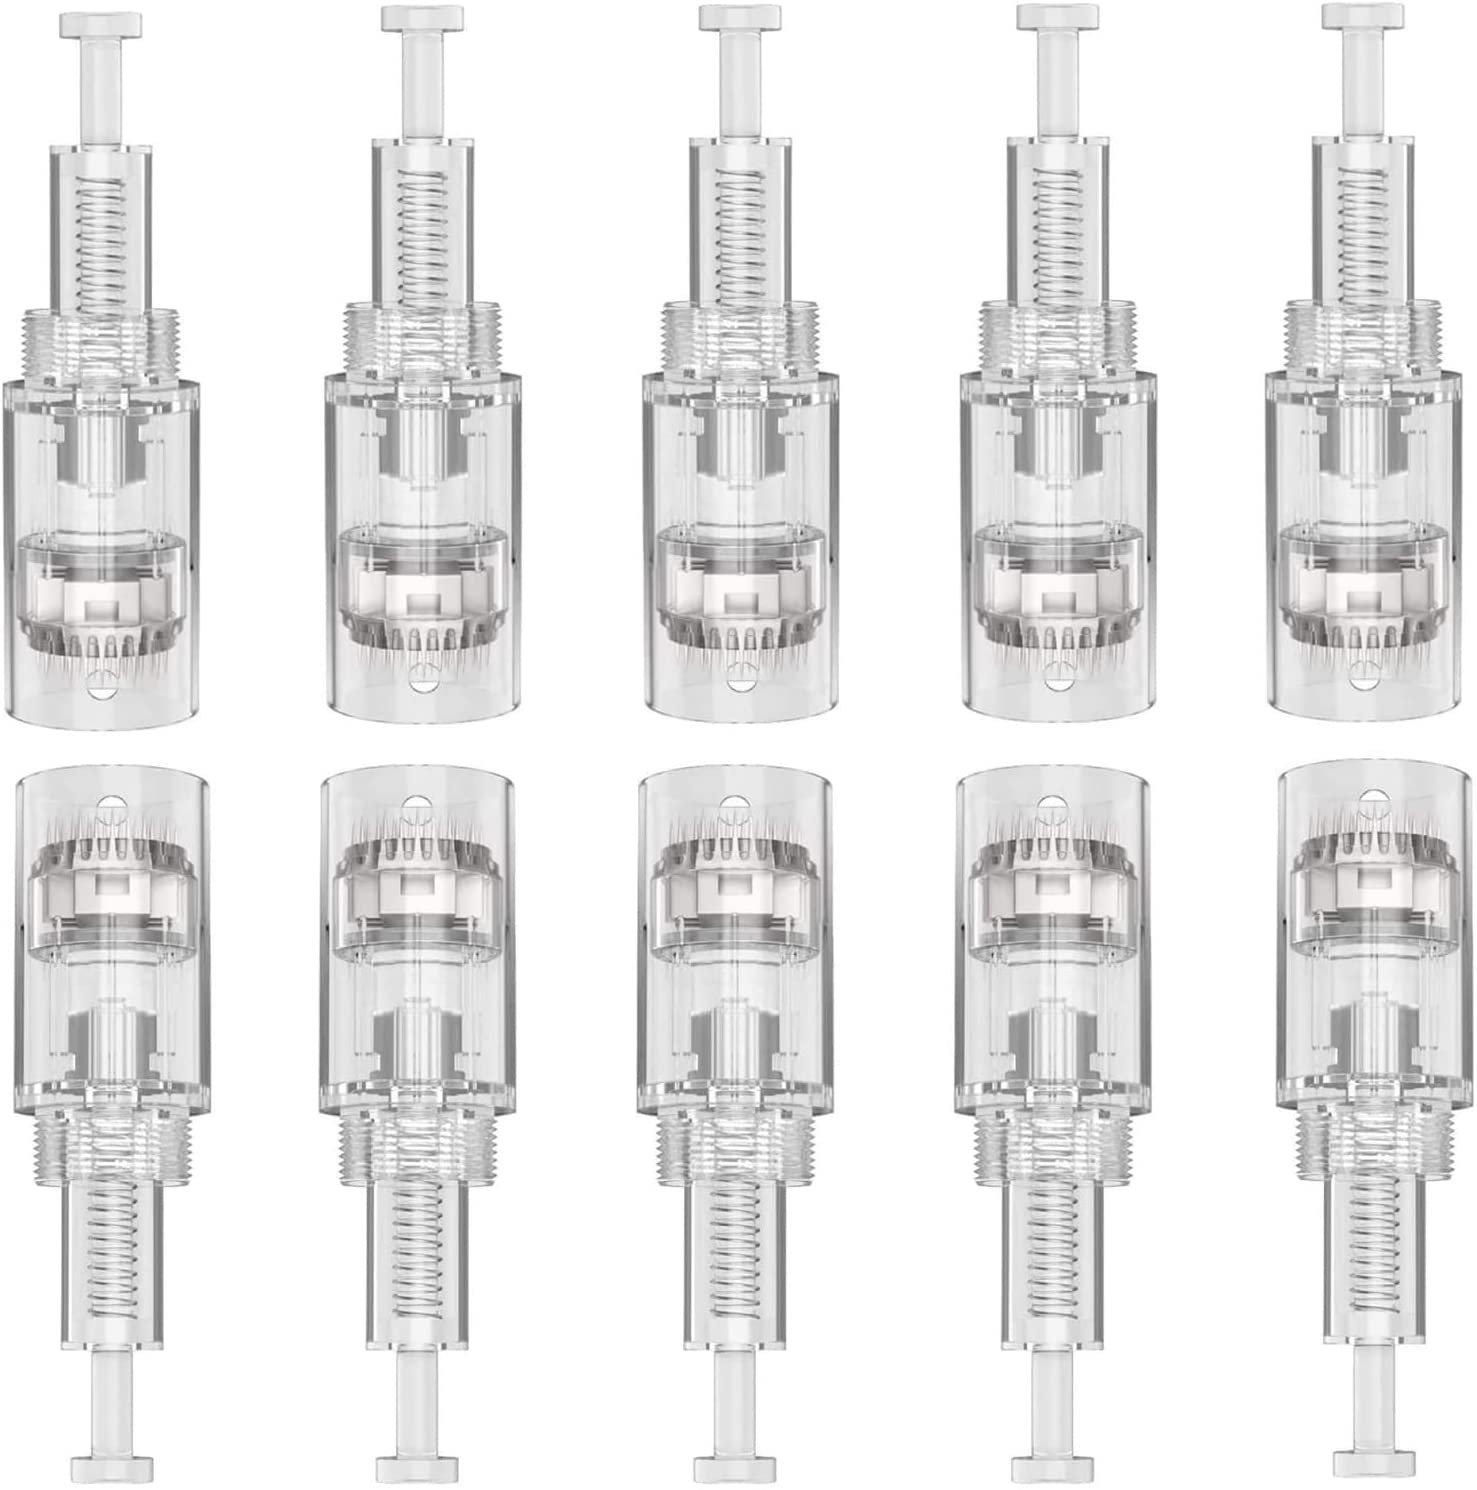 P-Beauty Cosmetic Accessories Dermapen Nano Needle Cartridges Replacement Needle Cartridges for Car Derma Electric Pen Microneedling Thread Closure Thread Slot Pack of 10 (Nano)